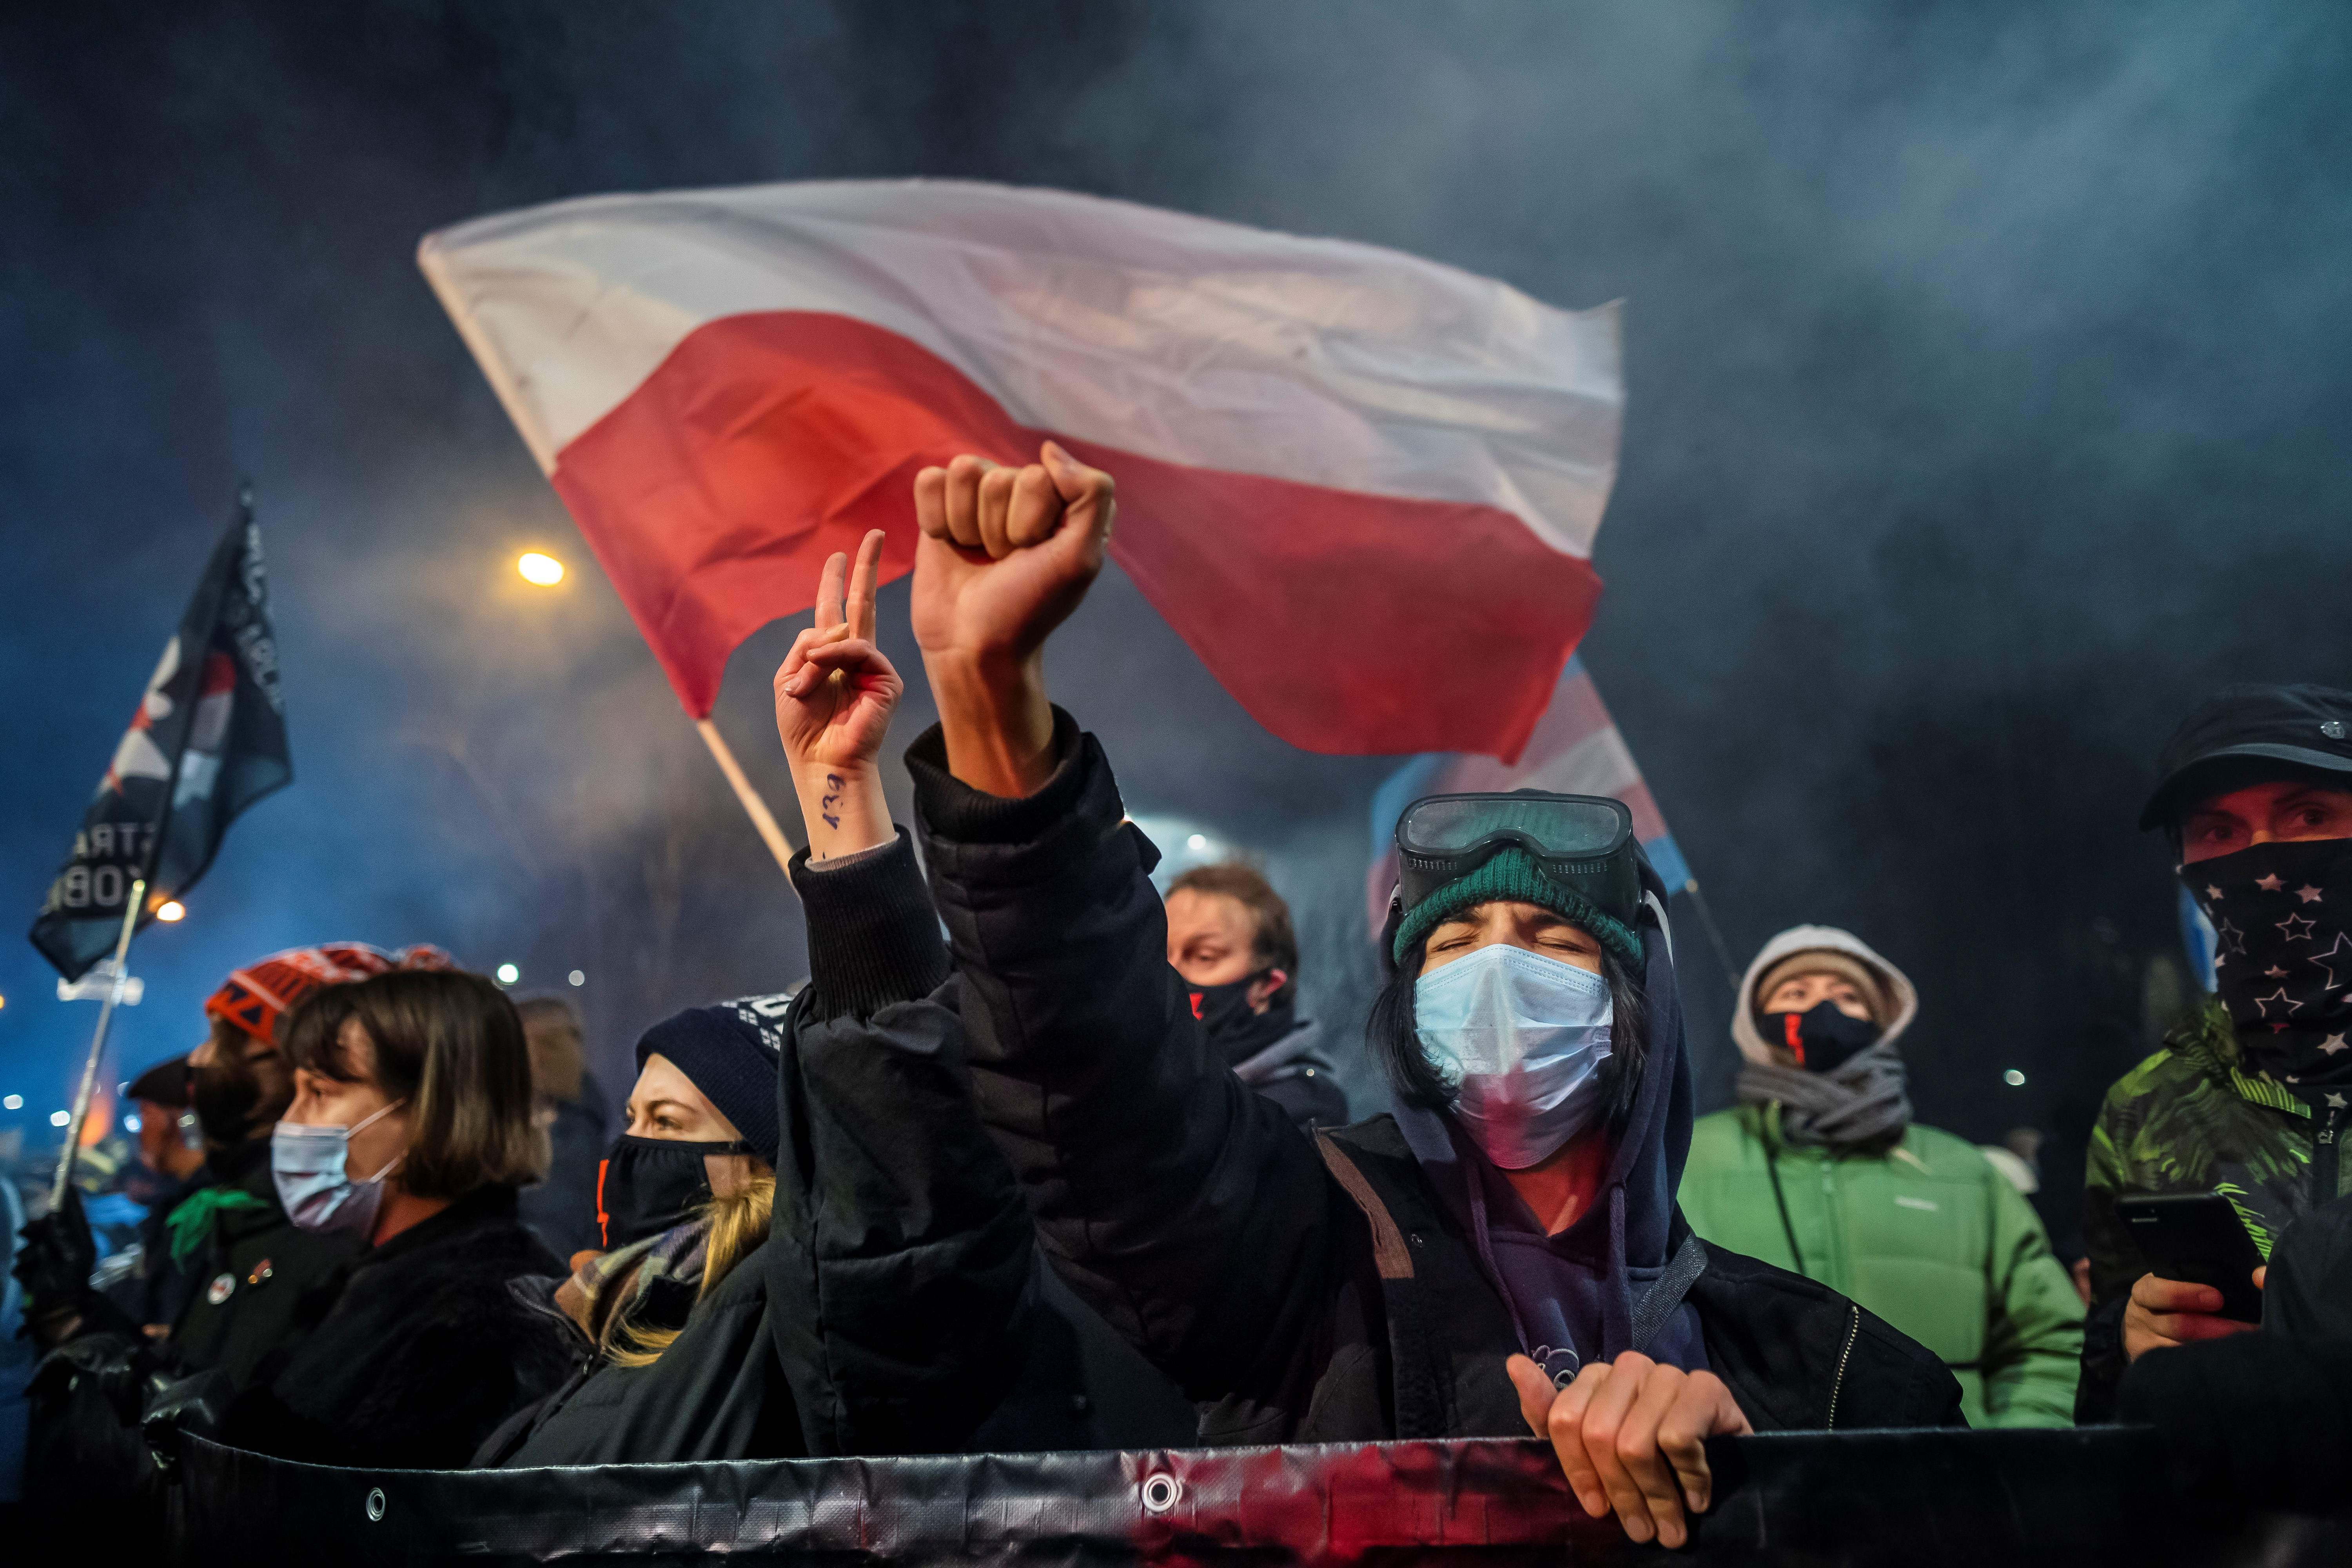 A demonstrator gestures as people take part in a pro-choice protest in Warsaw in January last year. Photo: WOJTEK RADWANSKI/AFP via Getty Images